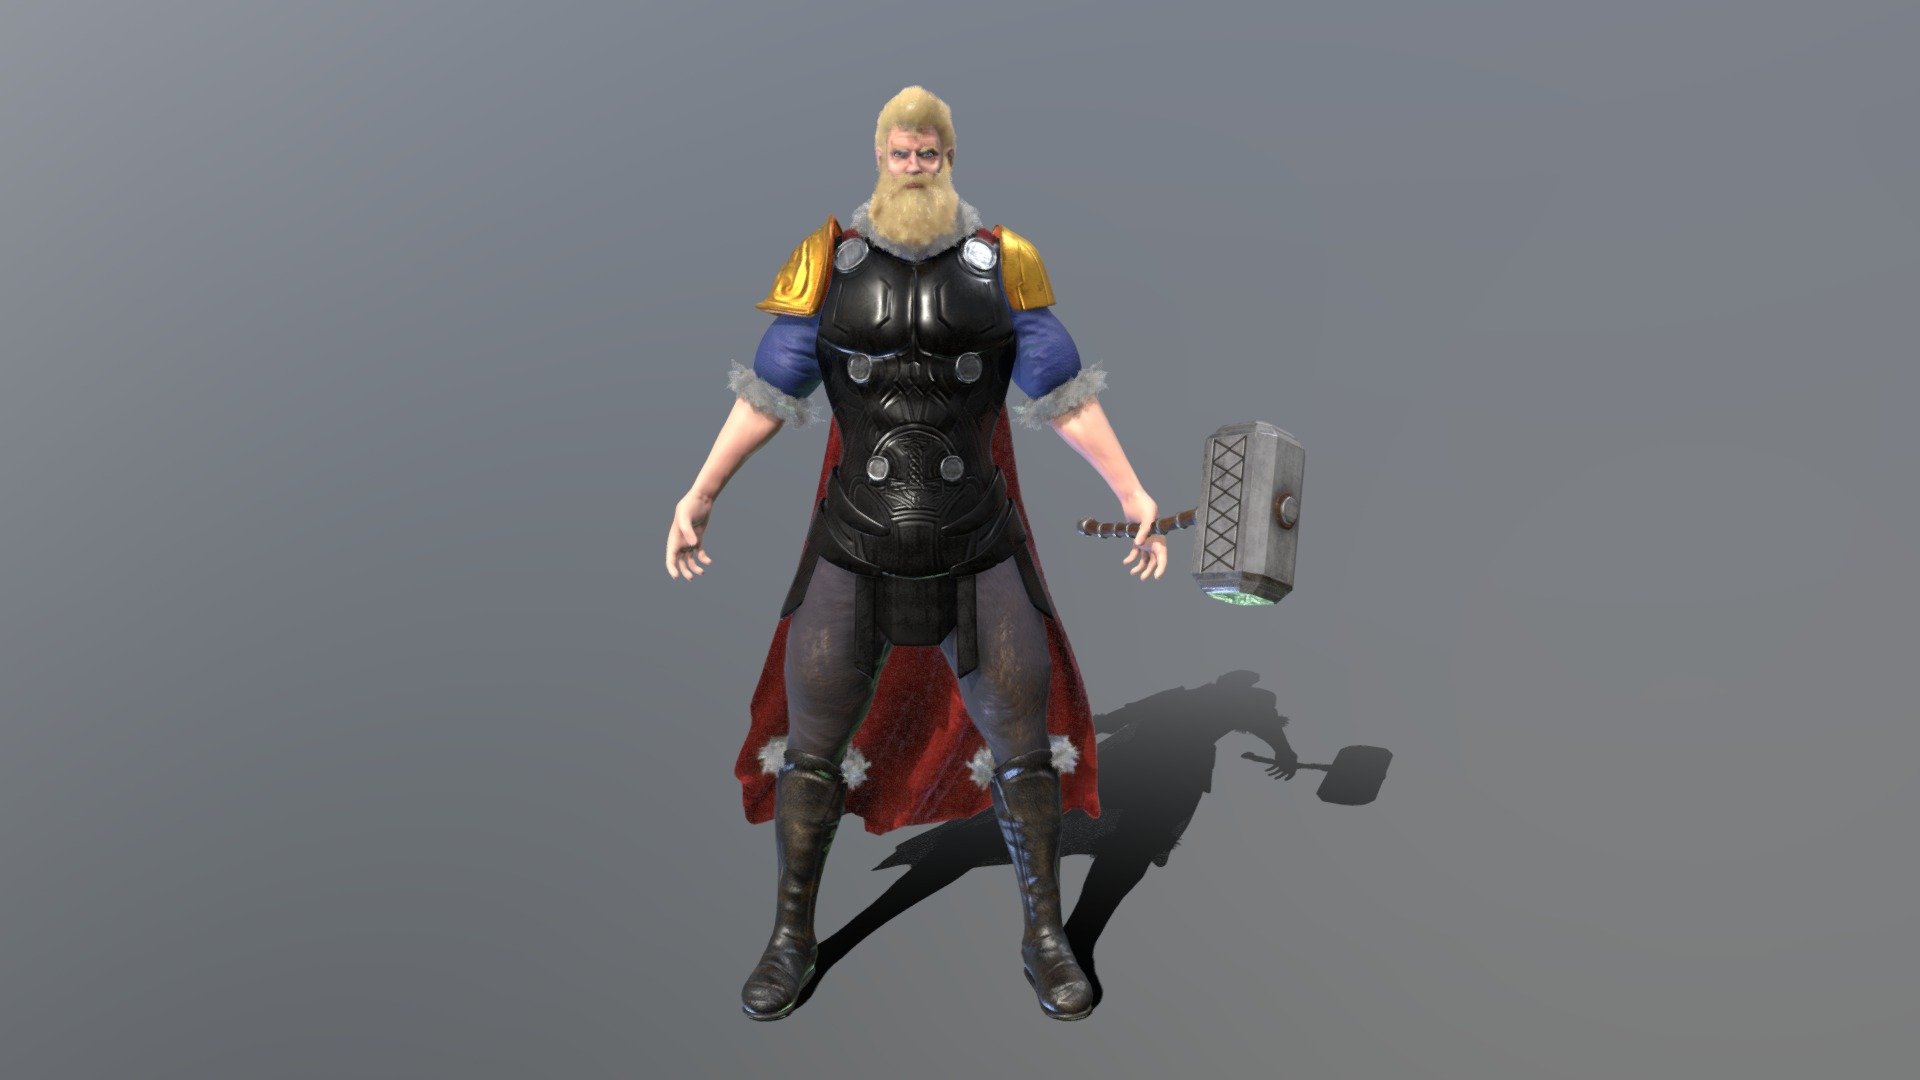 An original take on Thor, the Norse God of Thunder.

Loosely inspired by Marvel Comics and Square Enix's Final Fantasy 3d model